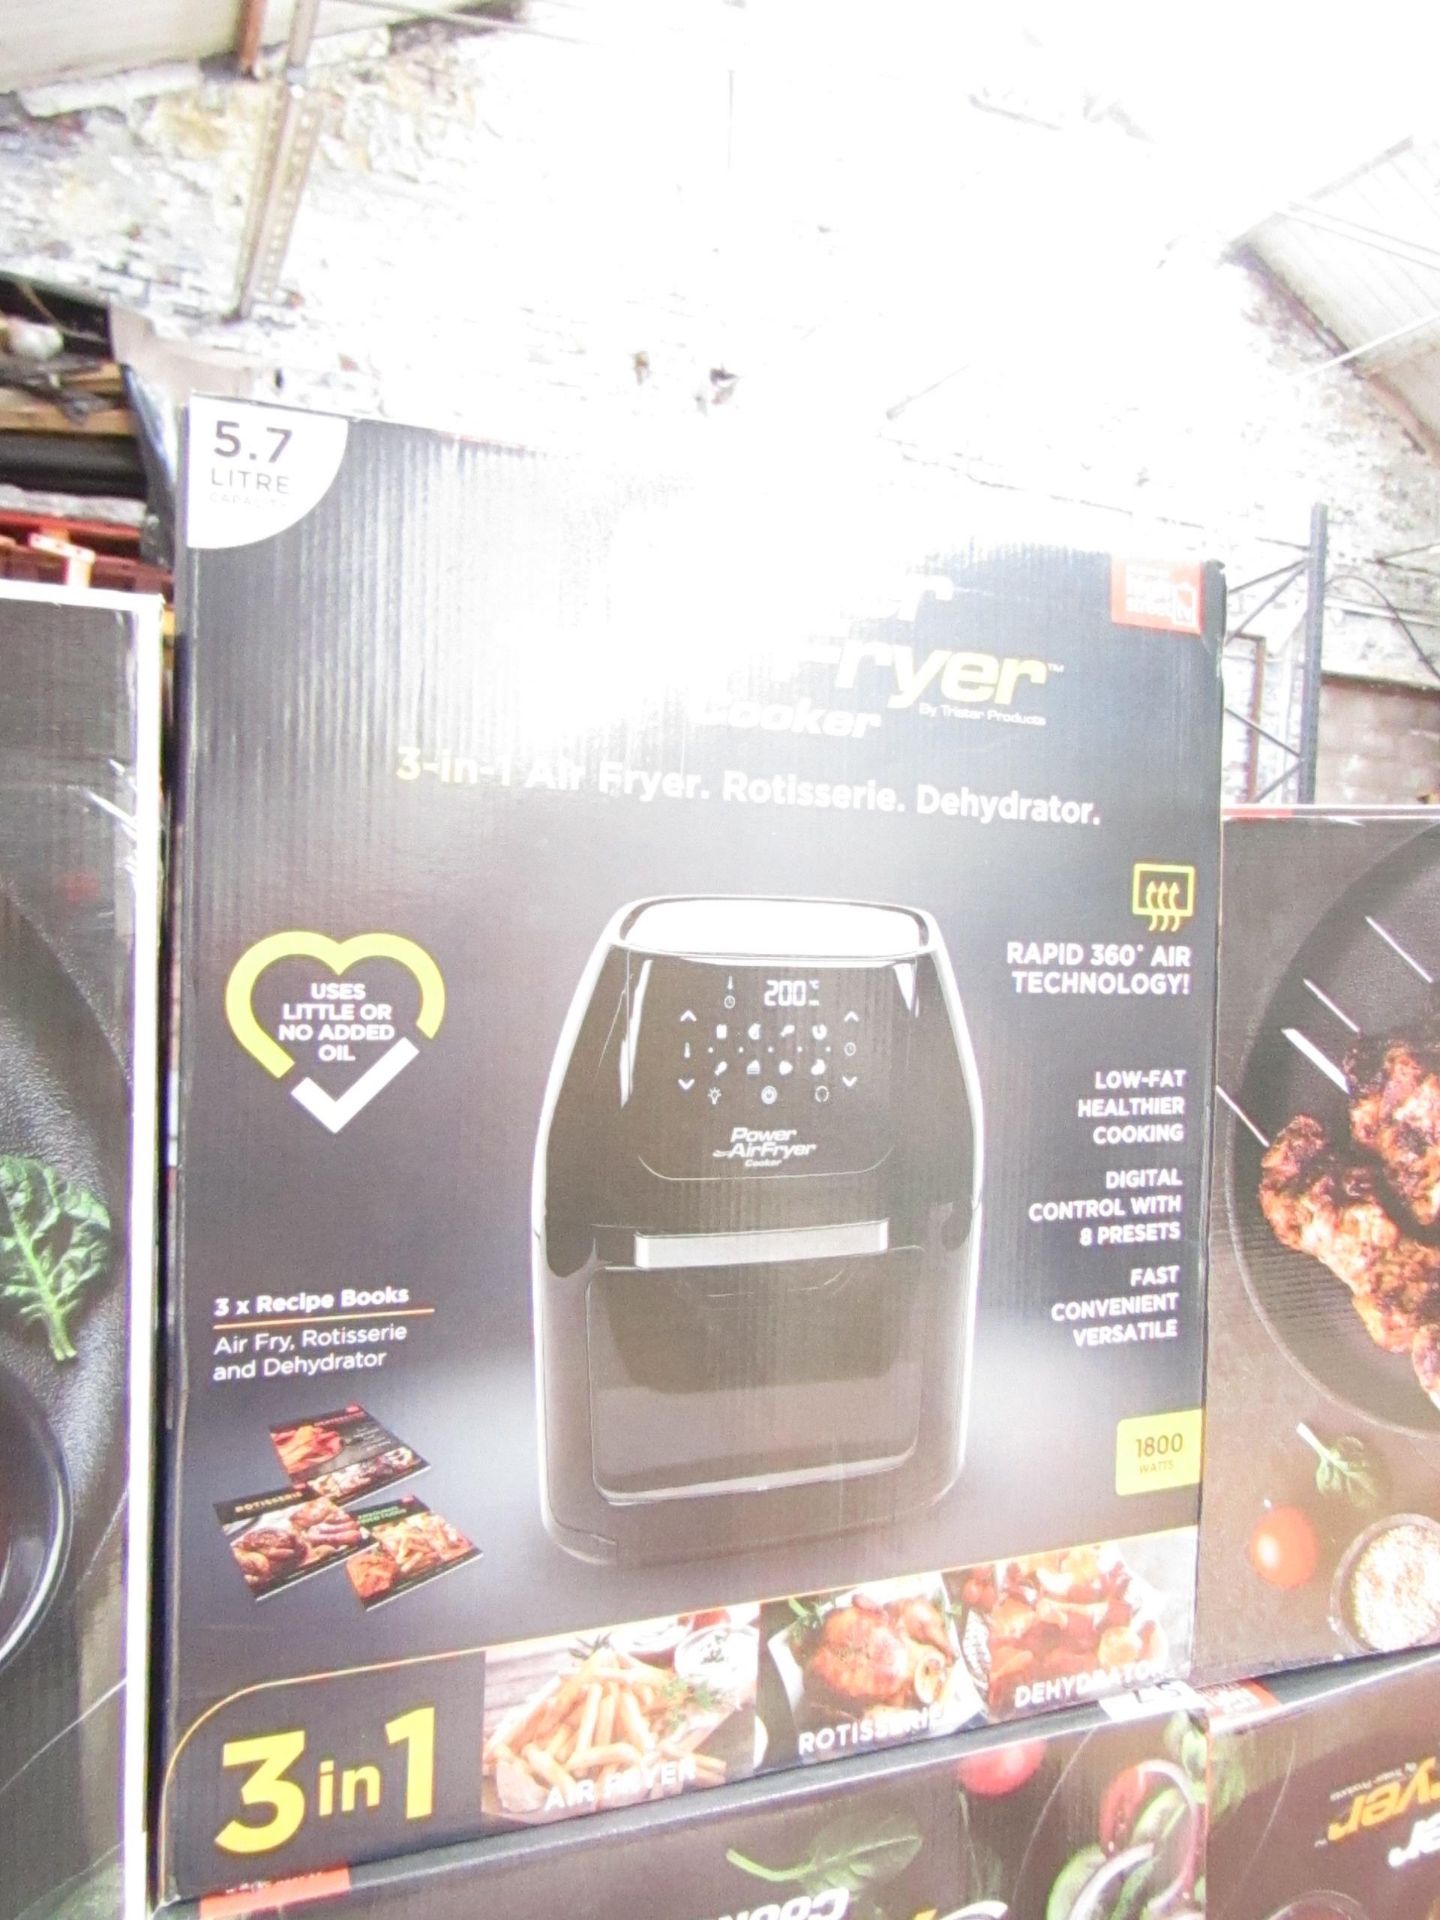 | 4X | POWER AIR FRYER COOKER 5.7LTR | UNCHECKED AND BOXED | SKU C5060541513068 | RRP £149.99 |